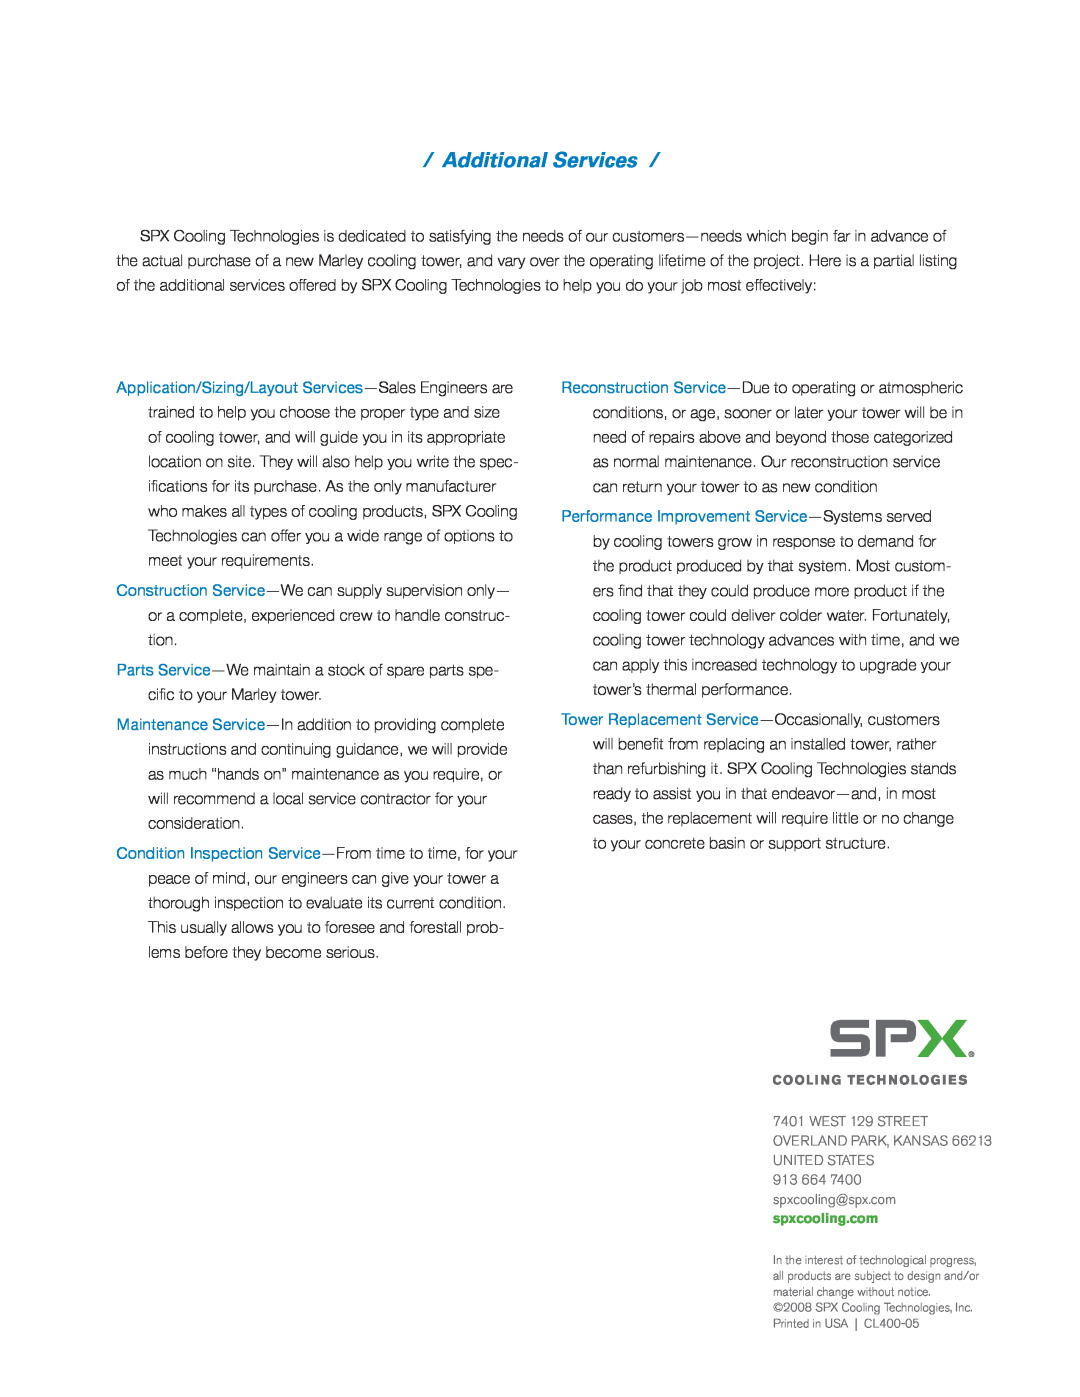 SPX Cooling Technologies W400 manual Additional Services 